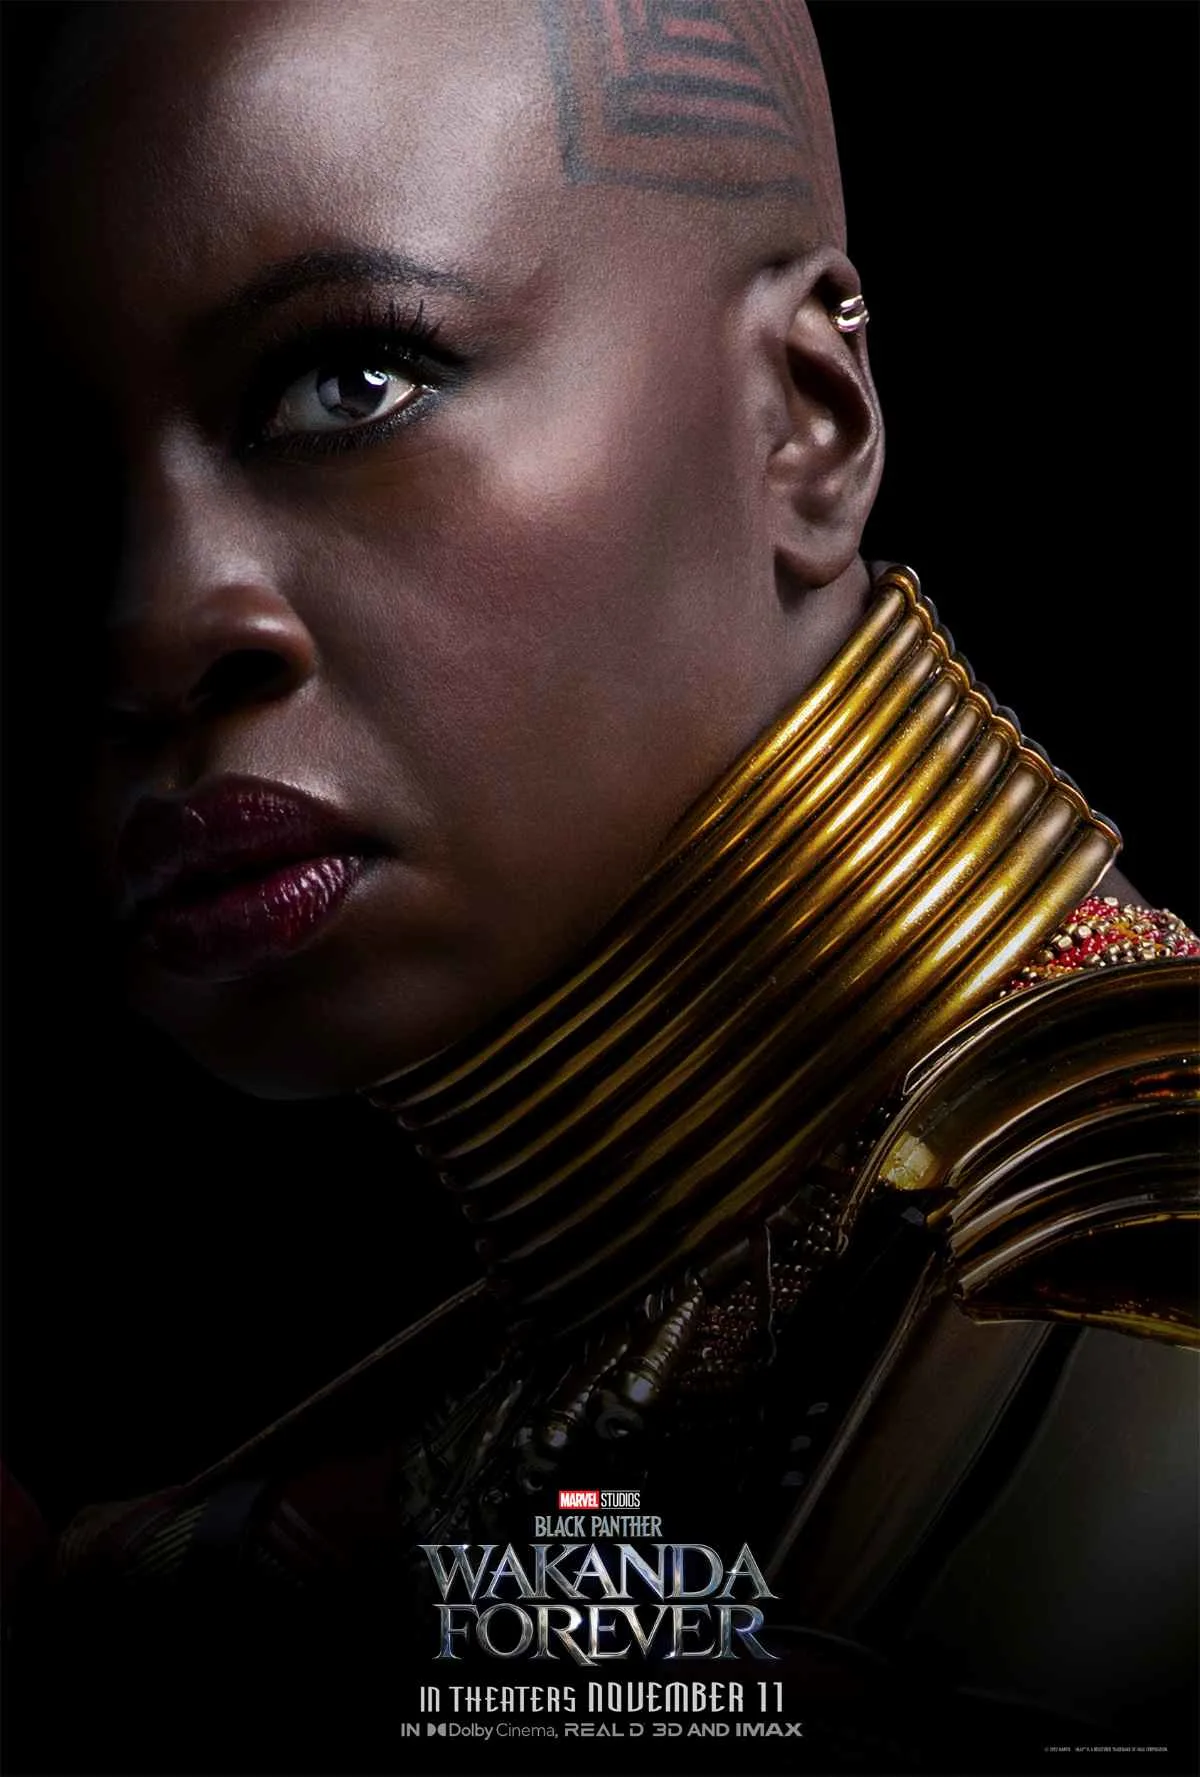 Wakanda Forever Posters and Featurette Debut